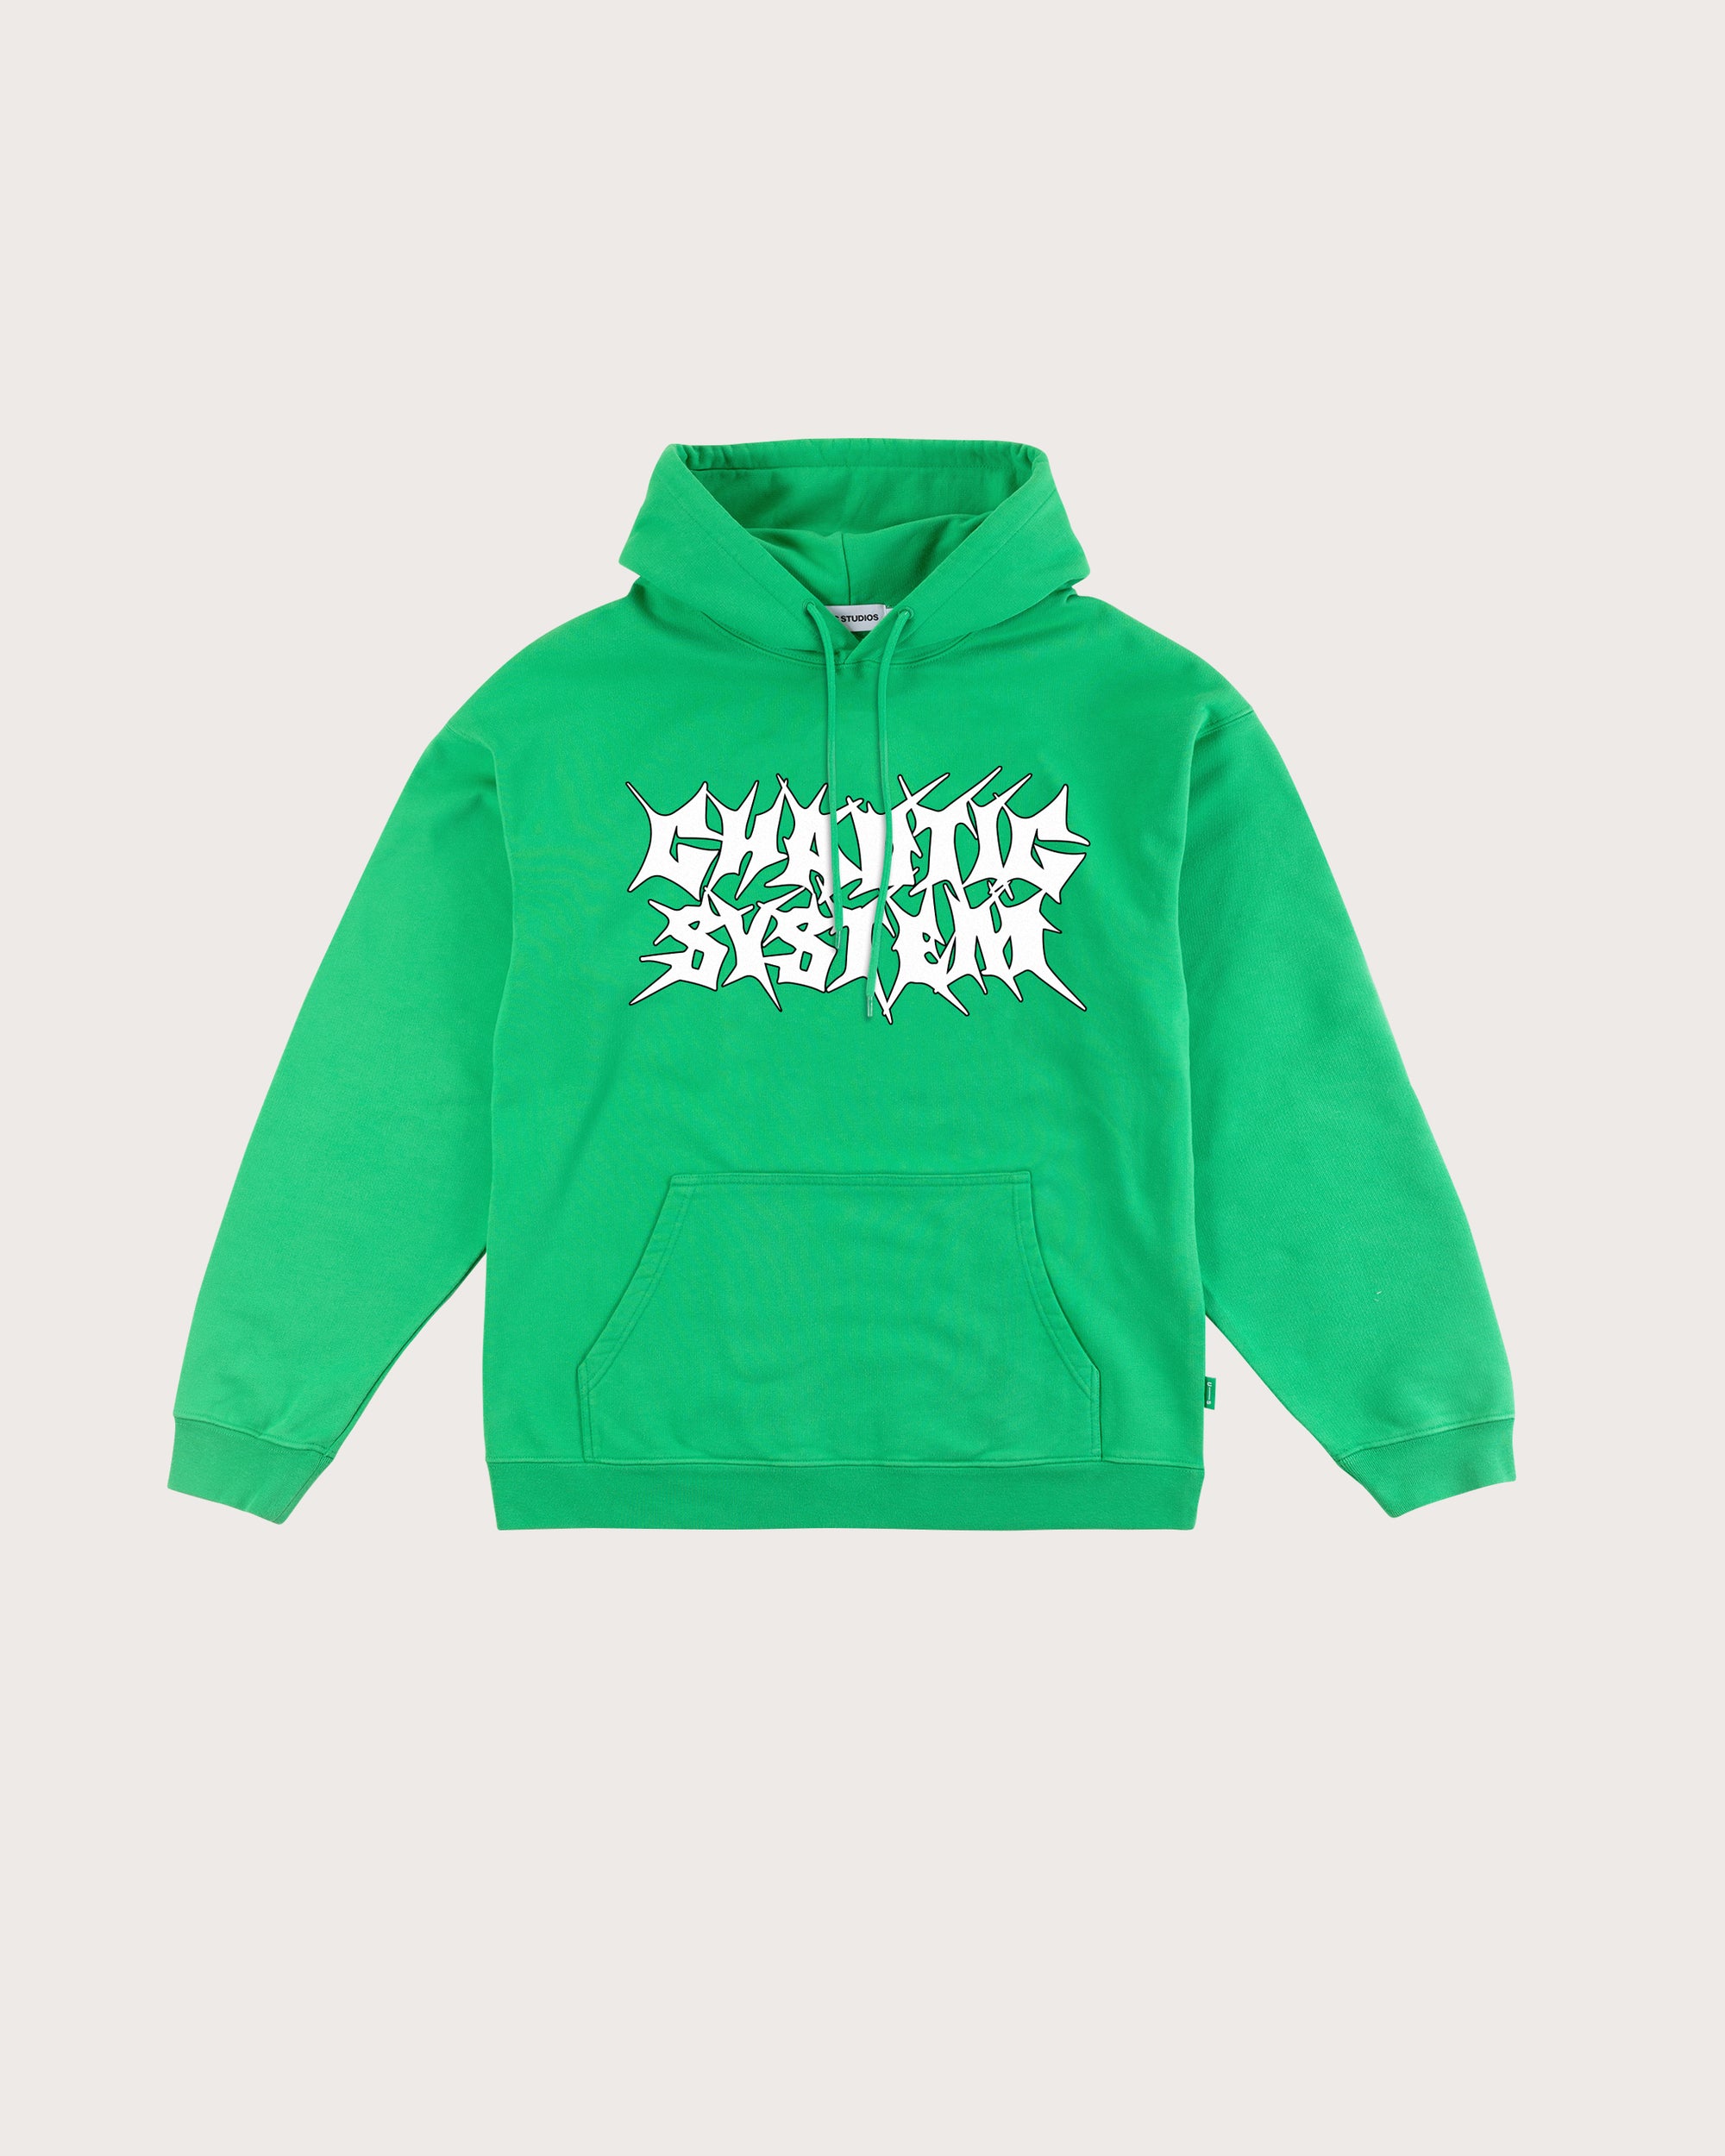 Chaotic System Hoodie (green)